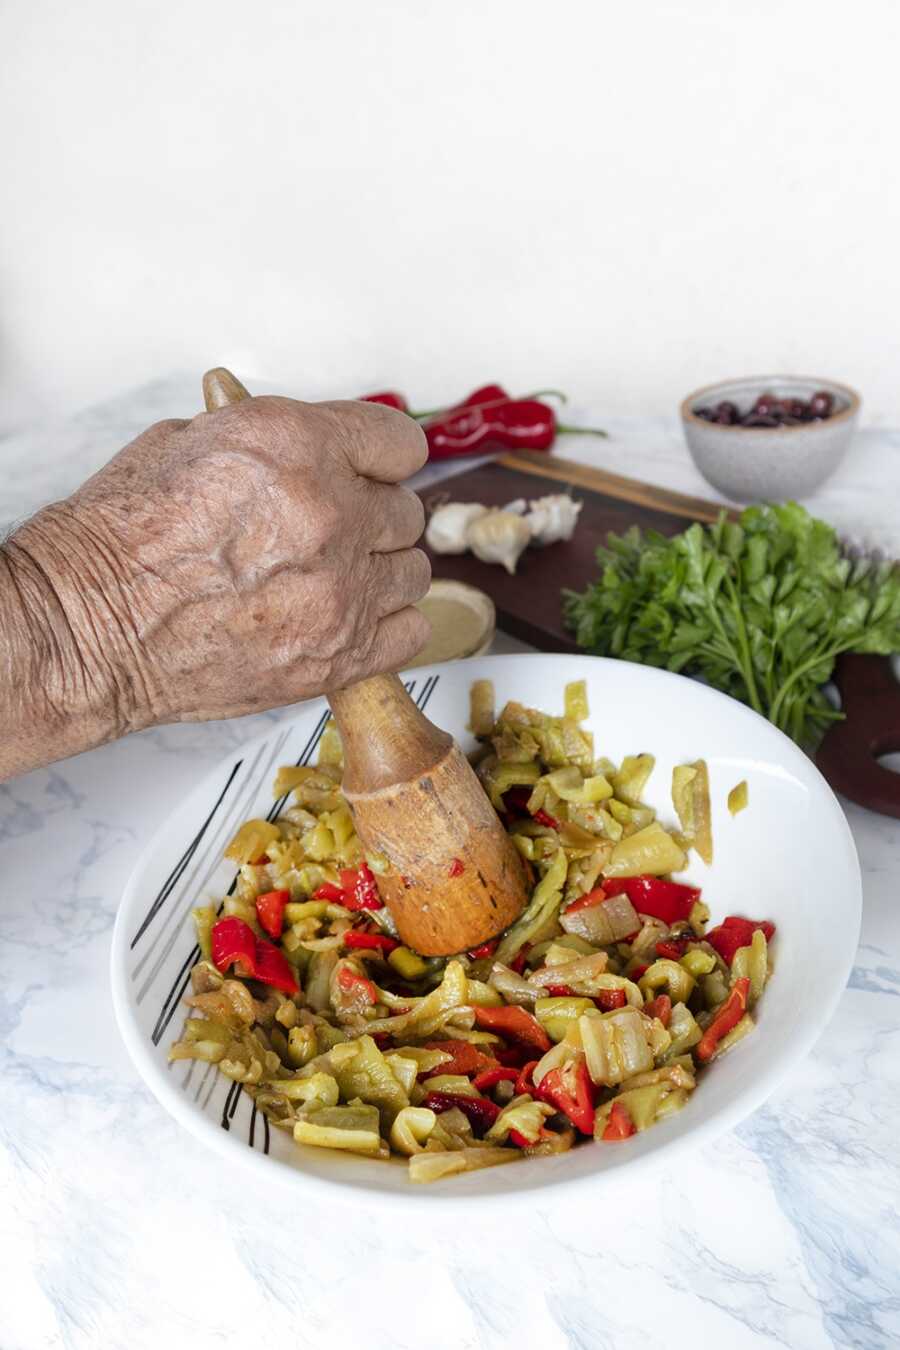 A grandma mashing peppers in a mortar with a pestle